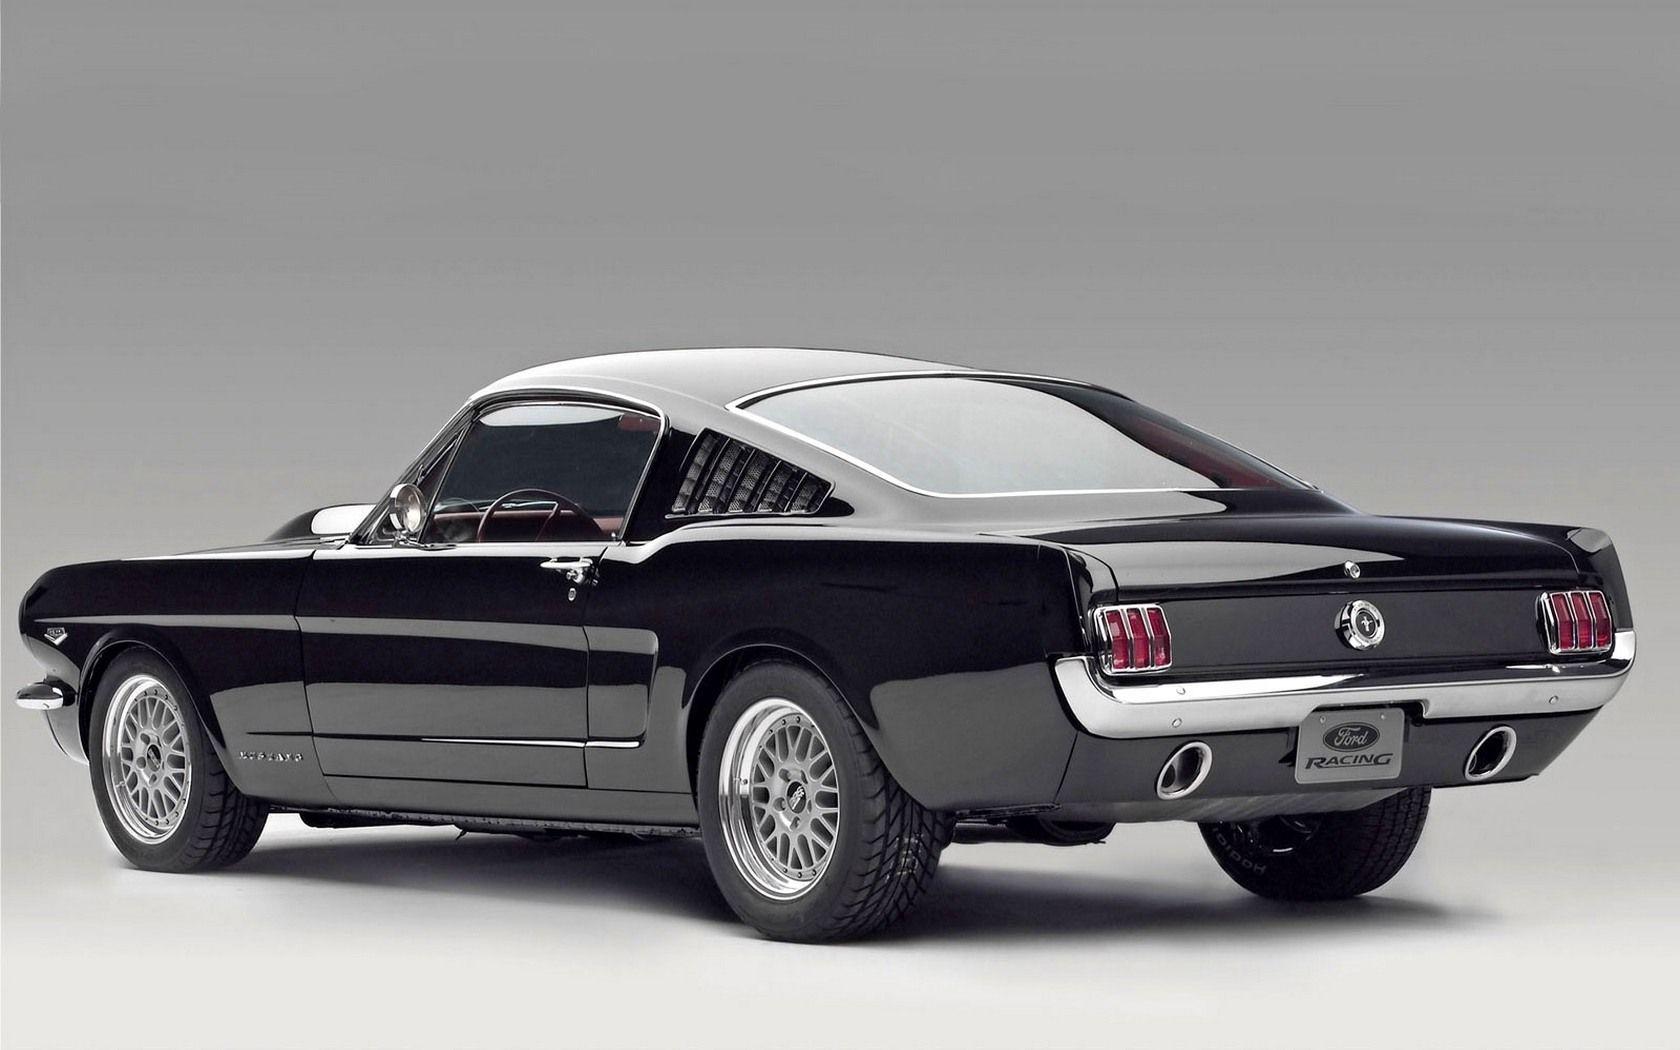 Ford Mustang Wallpaper 1792 1680x1050 px